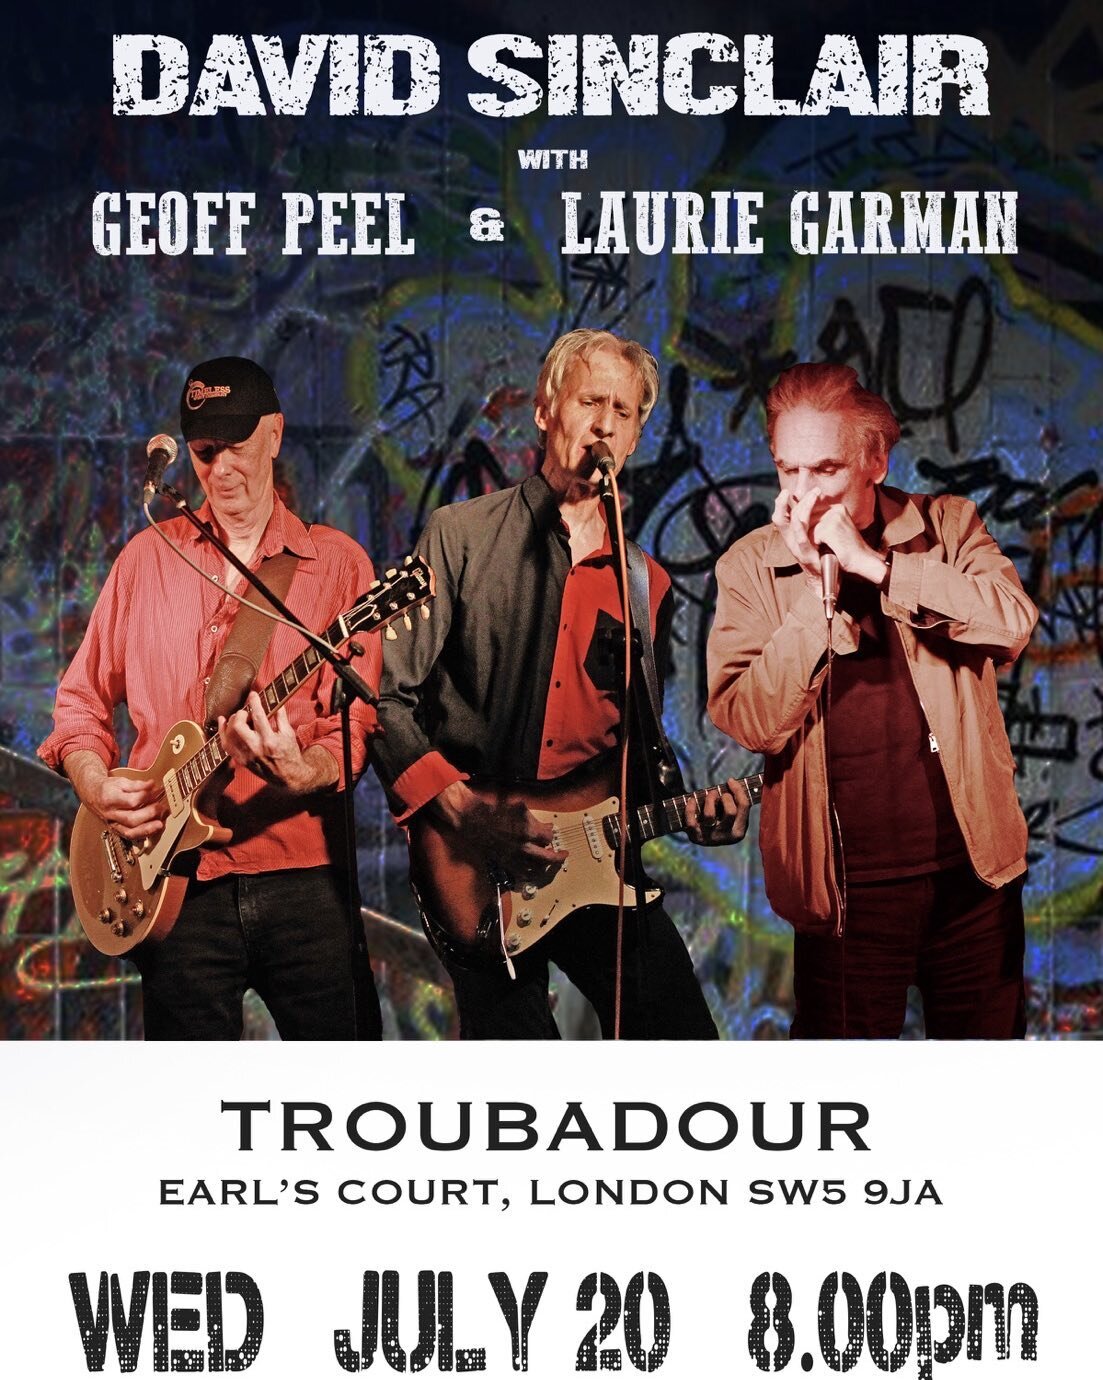 We&rsquo;re sorry to say, but due to circumstances beyond our control, the new music show @TroubadourLondon has been cancelled. 
Thanks for your support!
David, Geoff and Laurie.